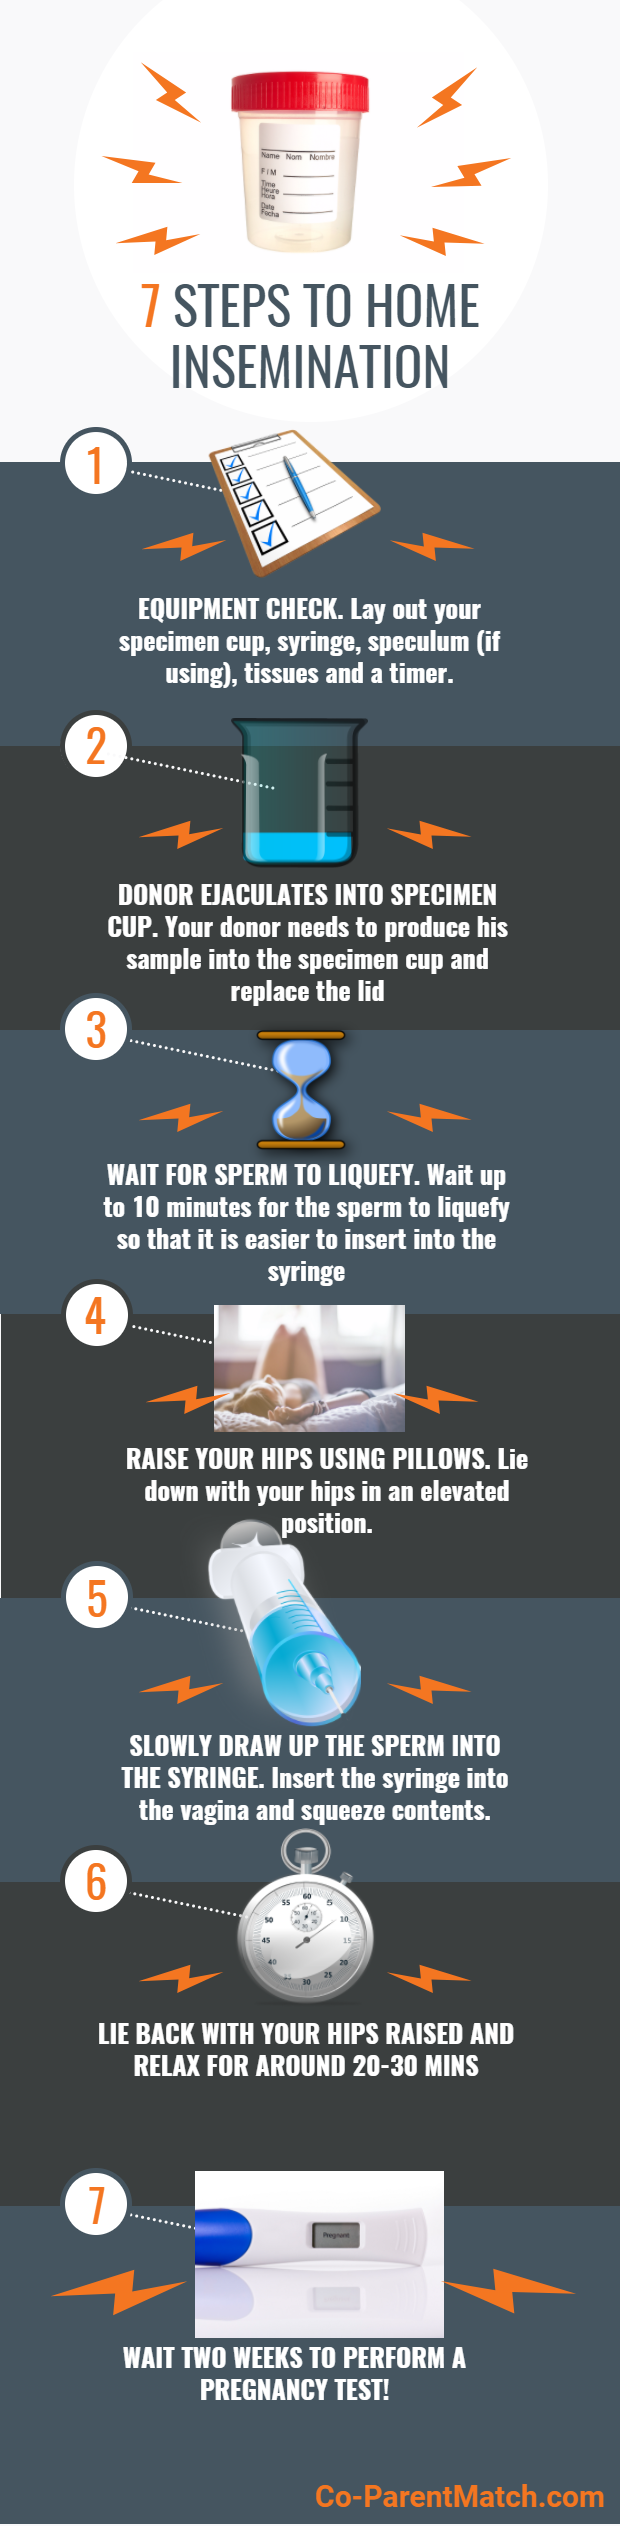 7 Steps to Home Insemination Infographic